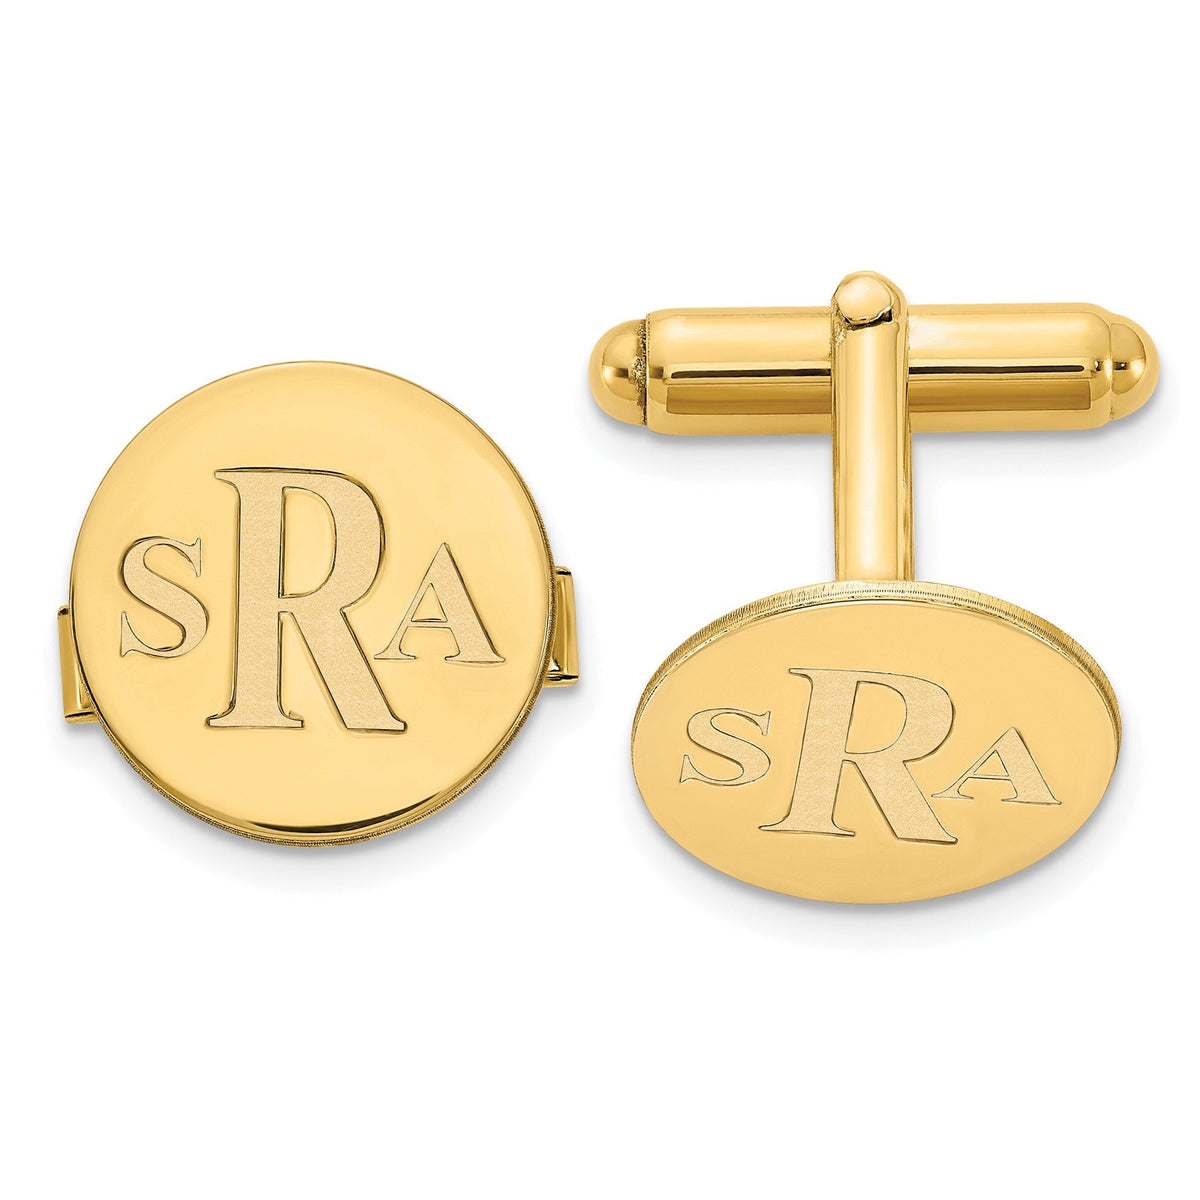 Circle Monogram Cufflinks Recessed Letters Available in Sterling Silver, White, Yellow & Rose Gold - Gift Box Included